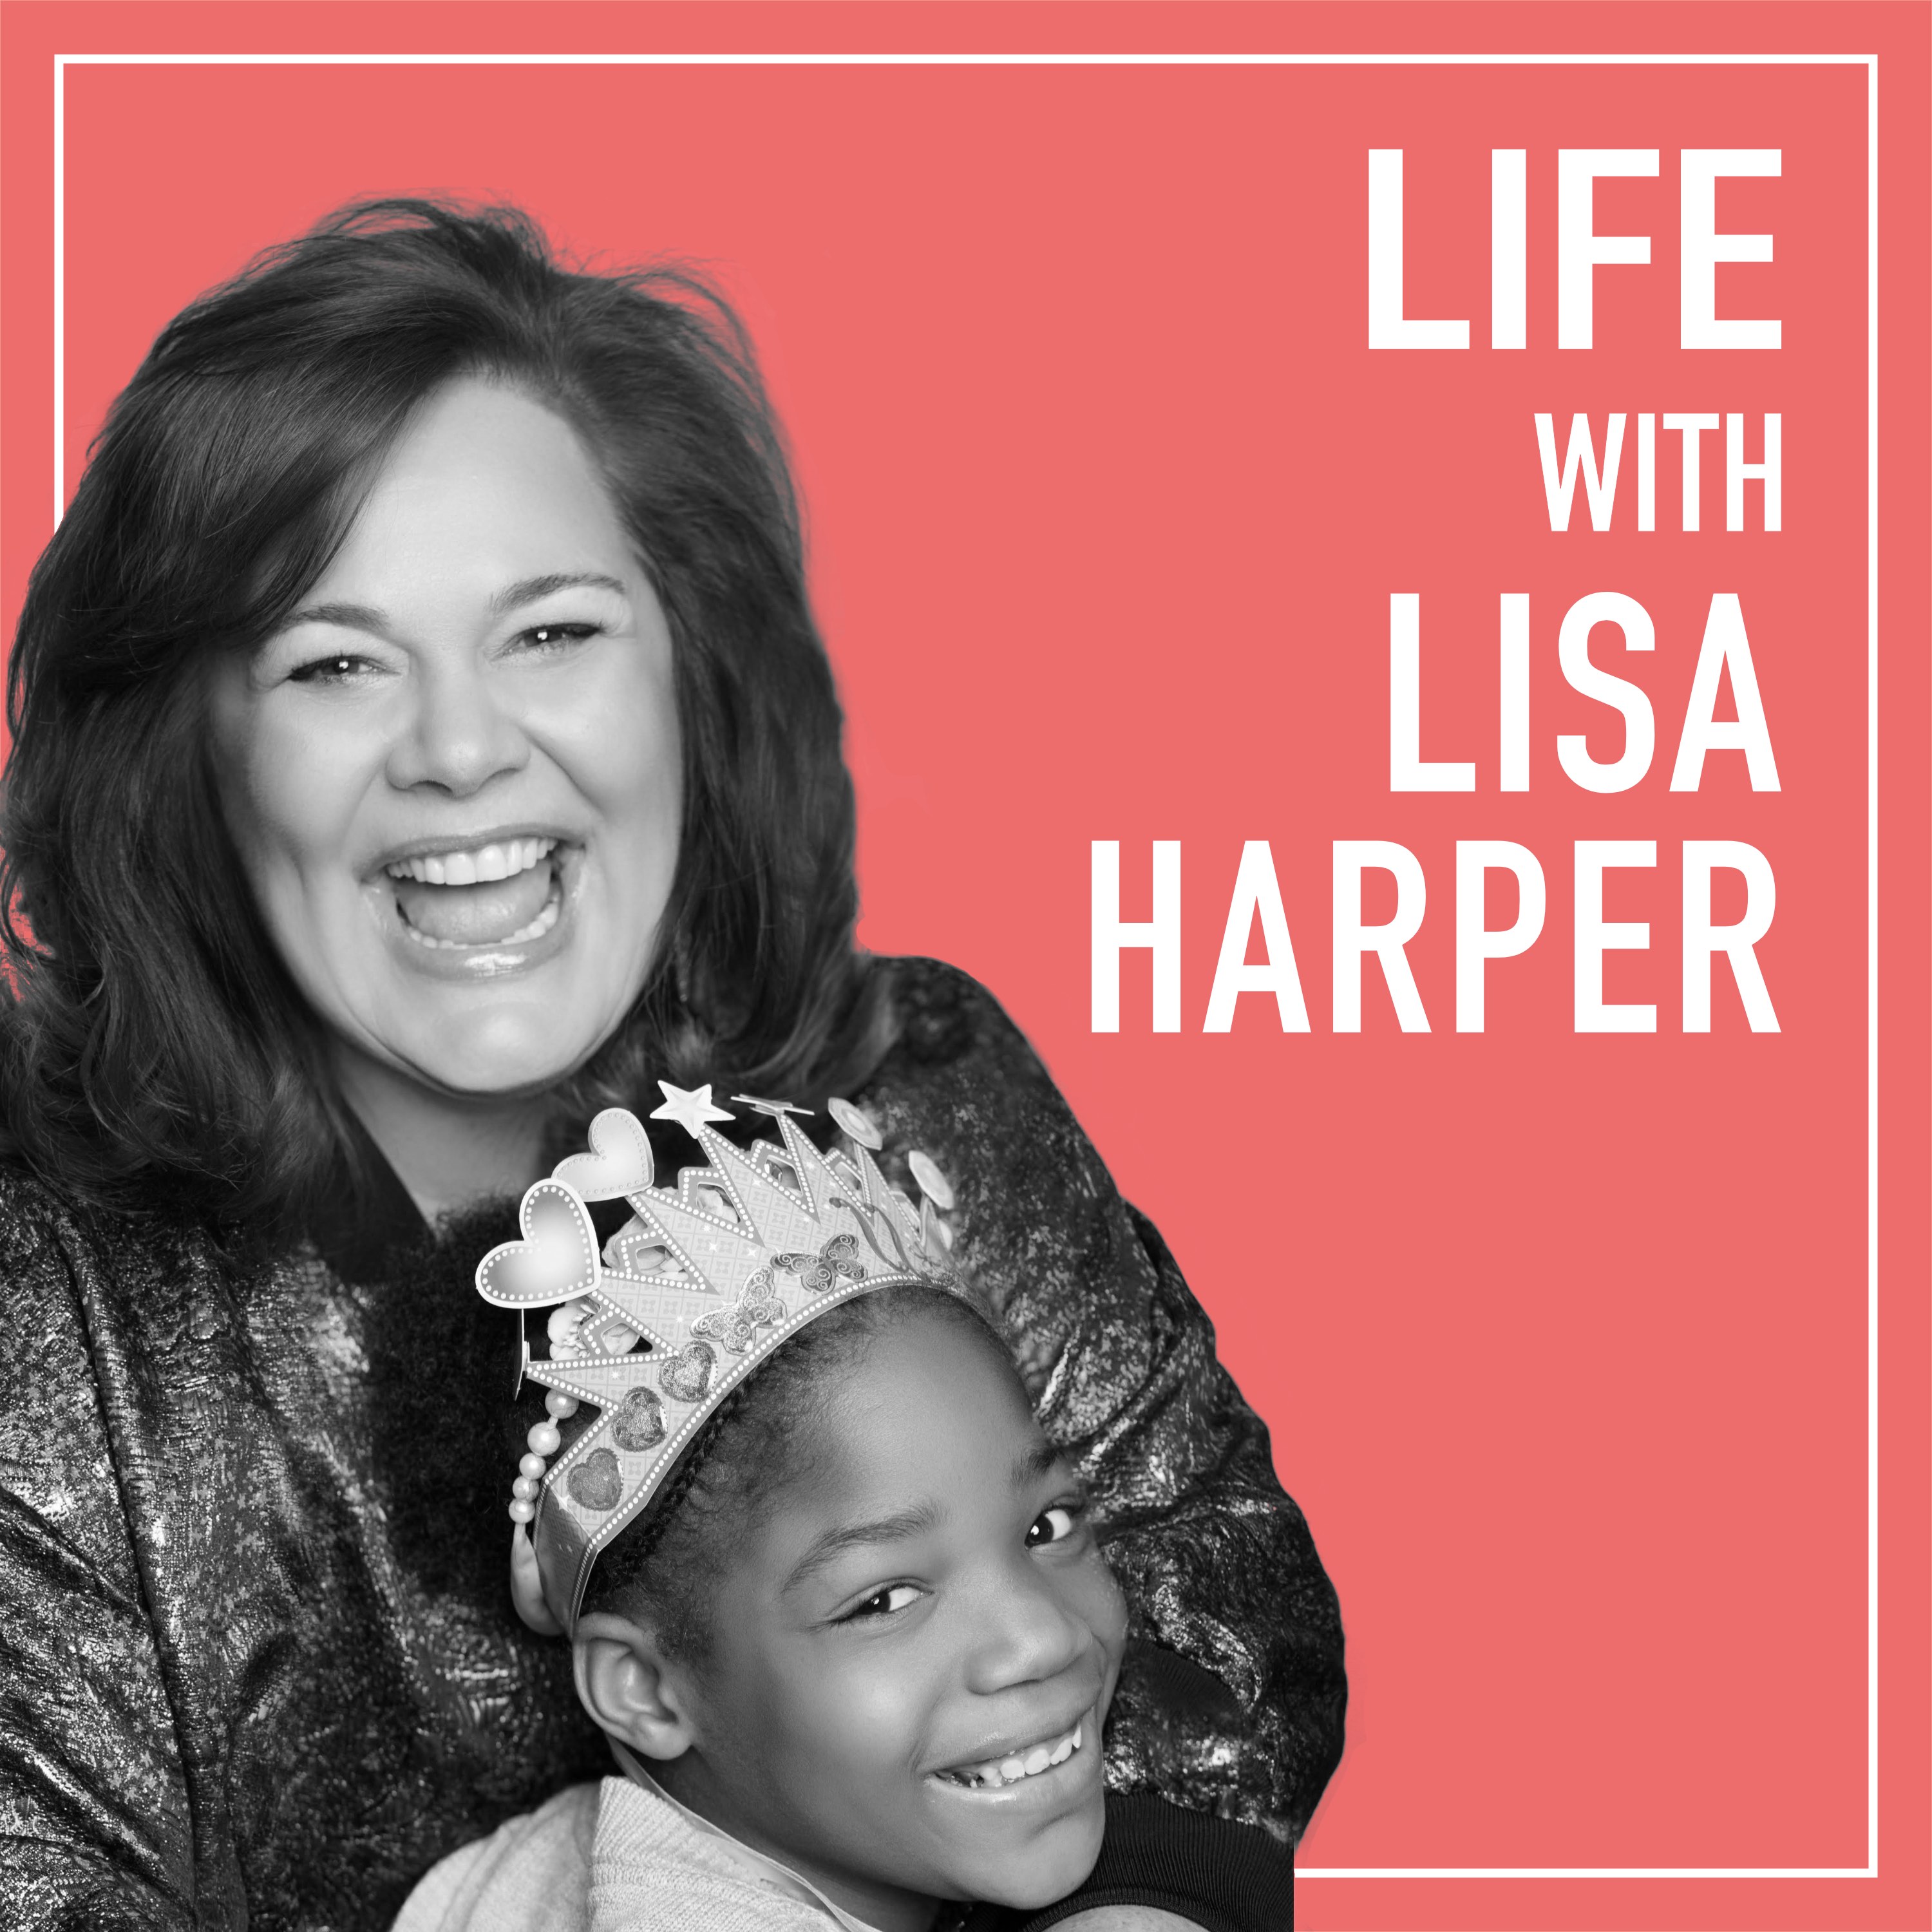 Life with Lisa Harper